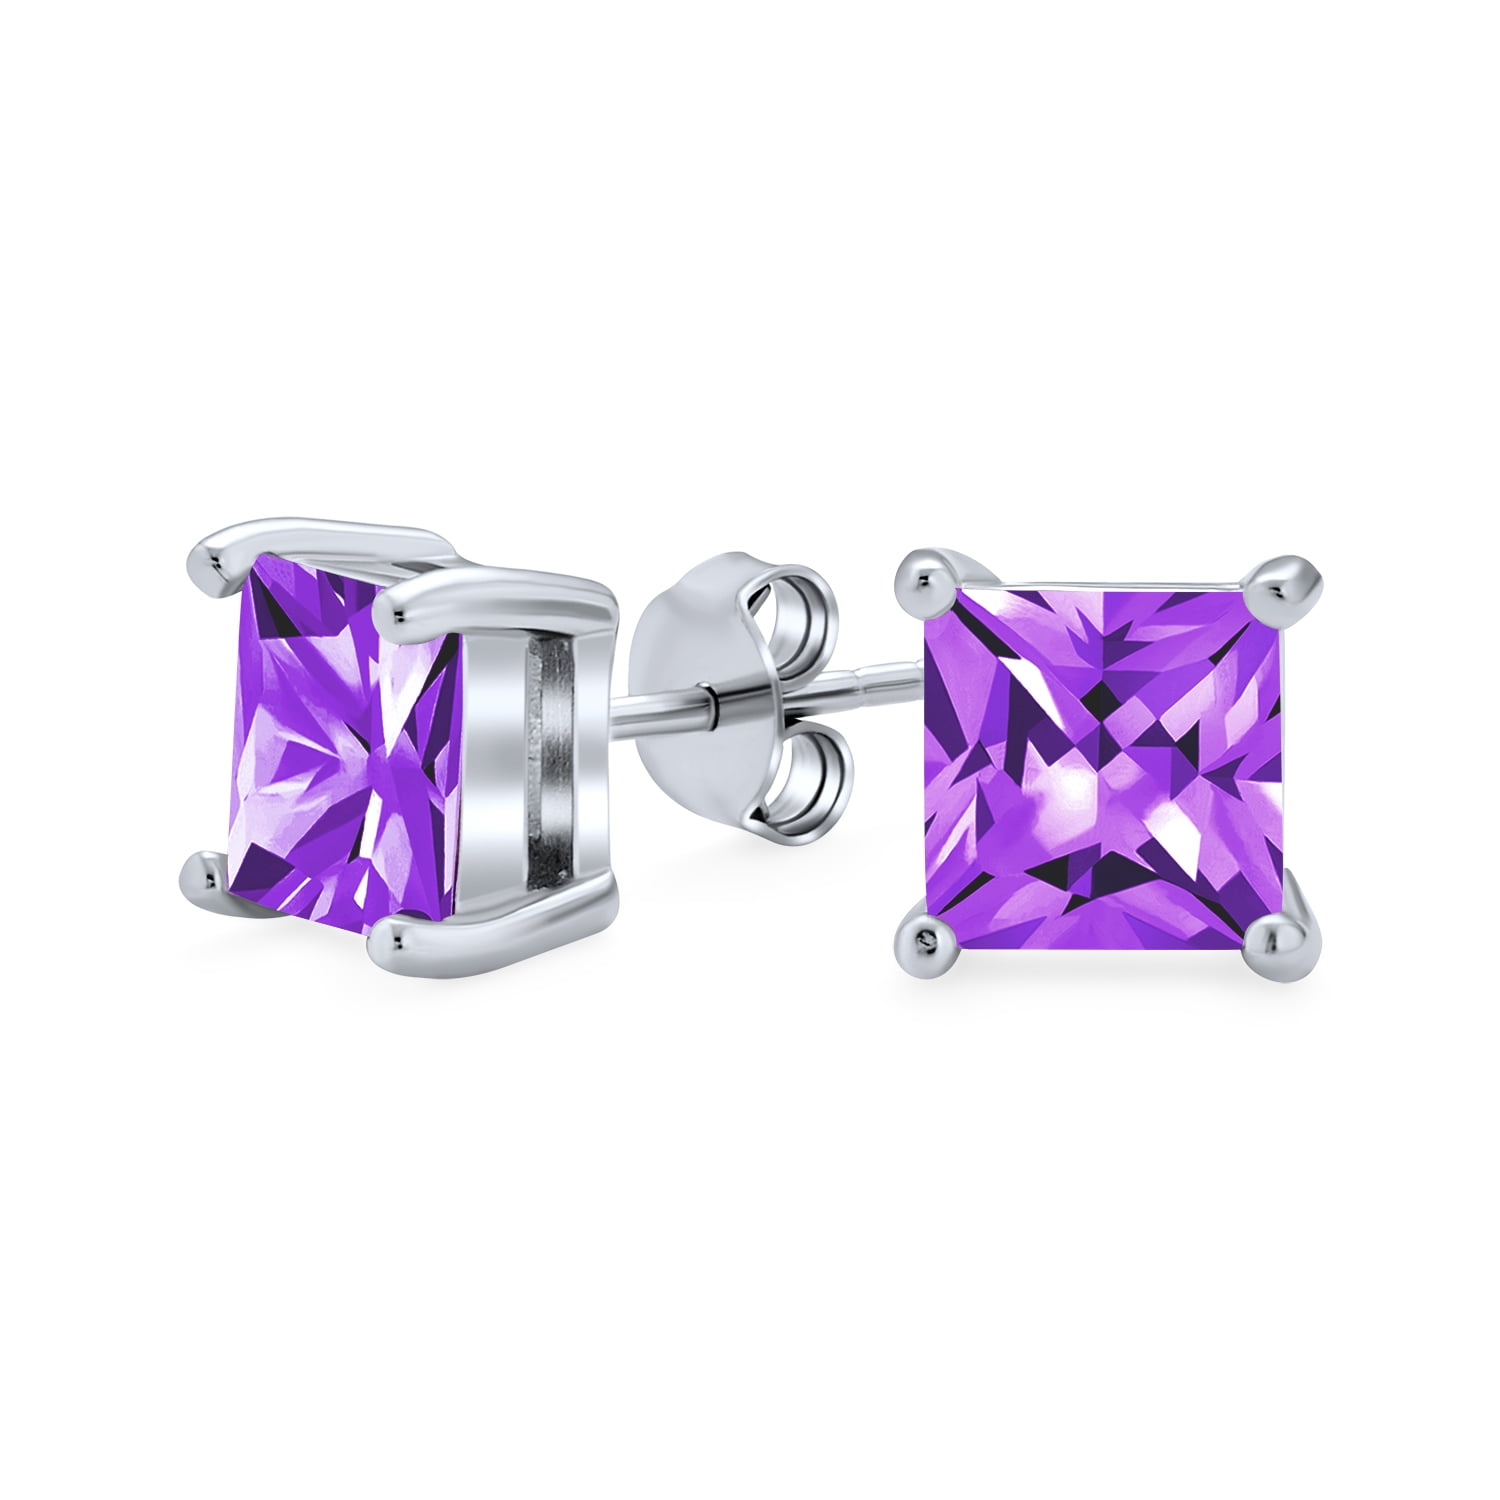 Solitaire Stud Earrings 14K White Gold Over .925 Sterling Silver SVC-JEWELS 3.50 CT Round Cut Amethyst 7MM